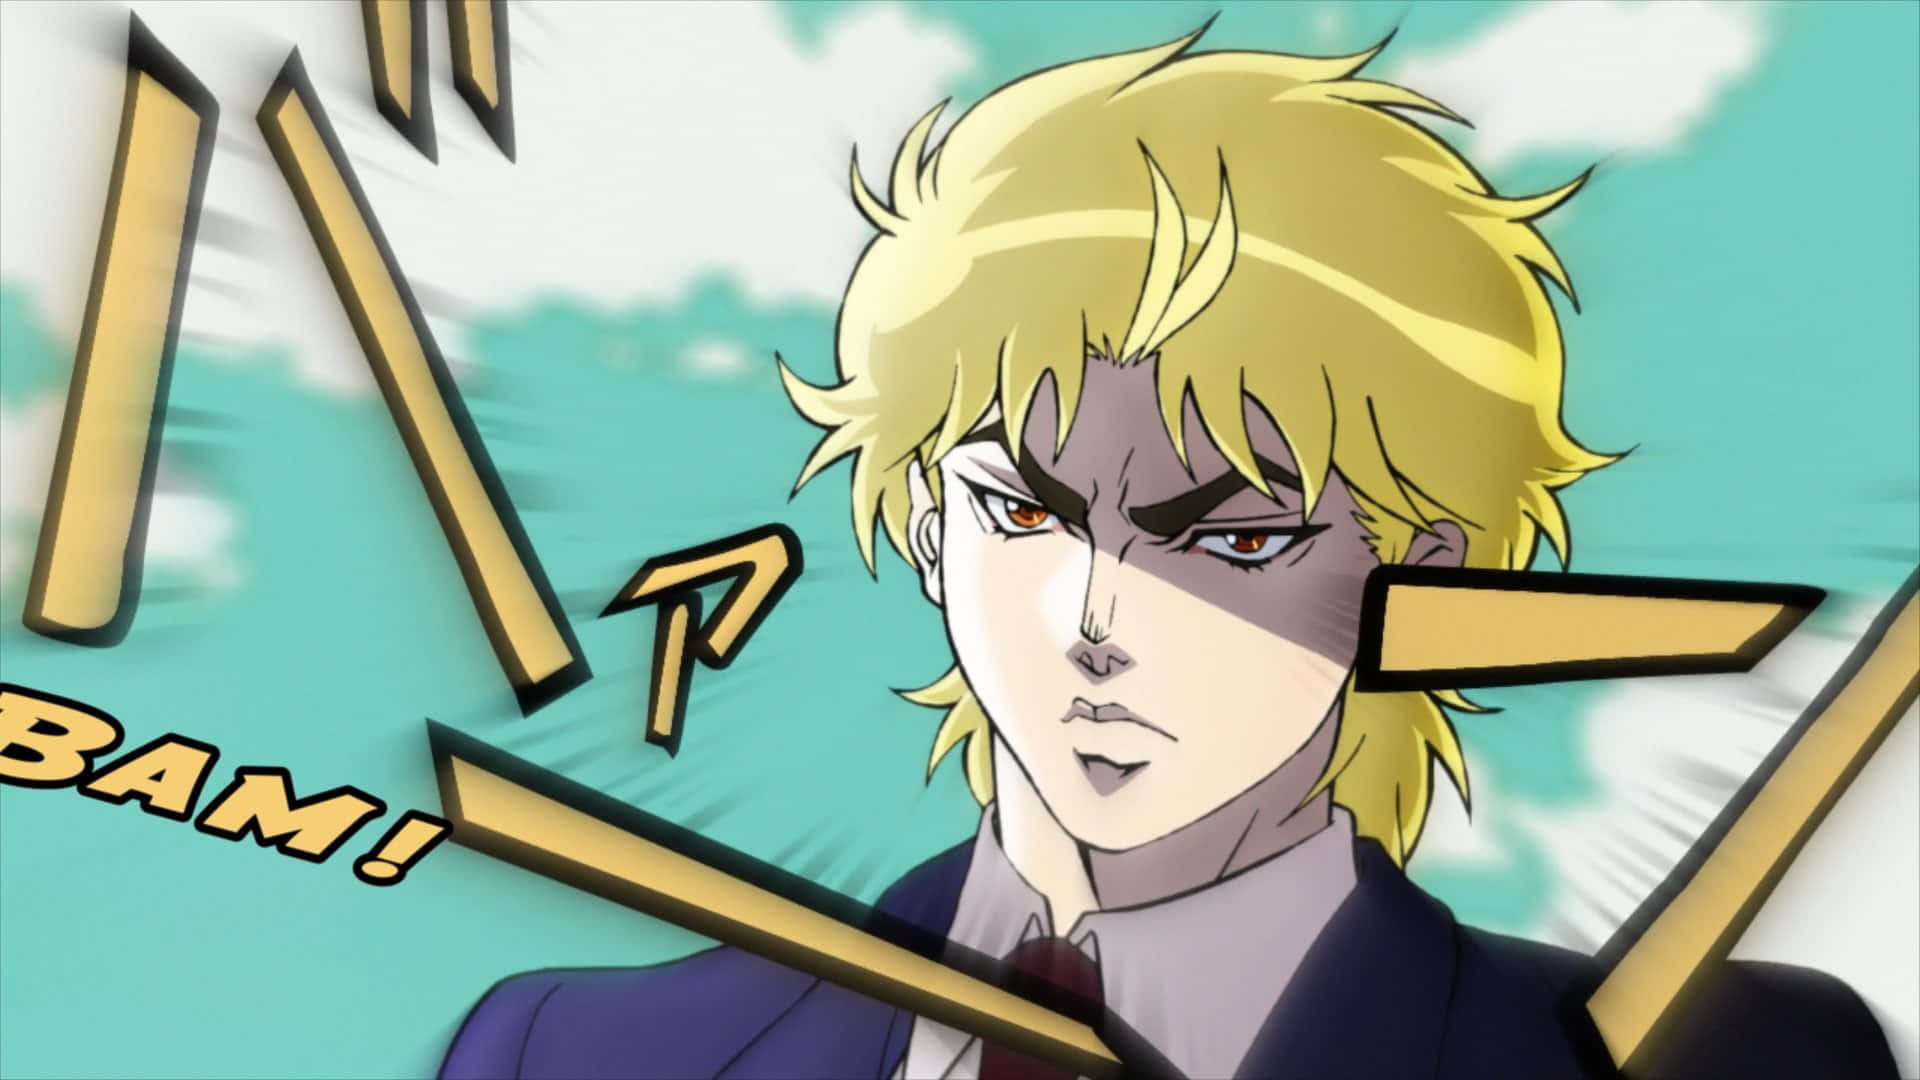 Your Fave T-Poses! — Dio Brando from JoJo's Bizarre Adventure t, pose jojo  dio - connecting.kanal.brussels